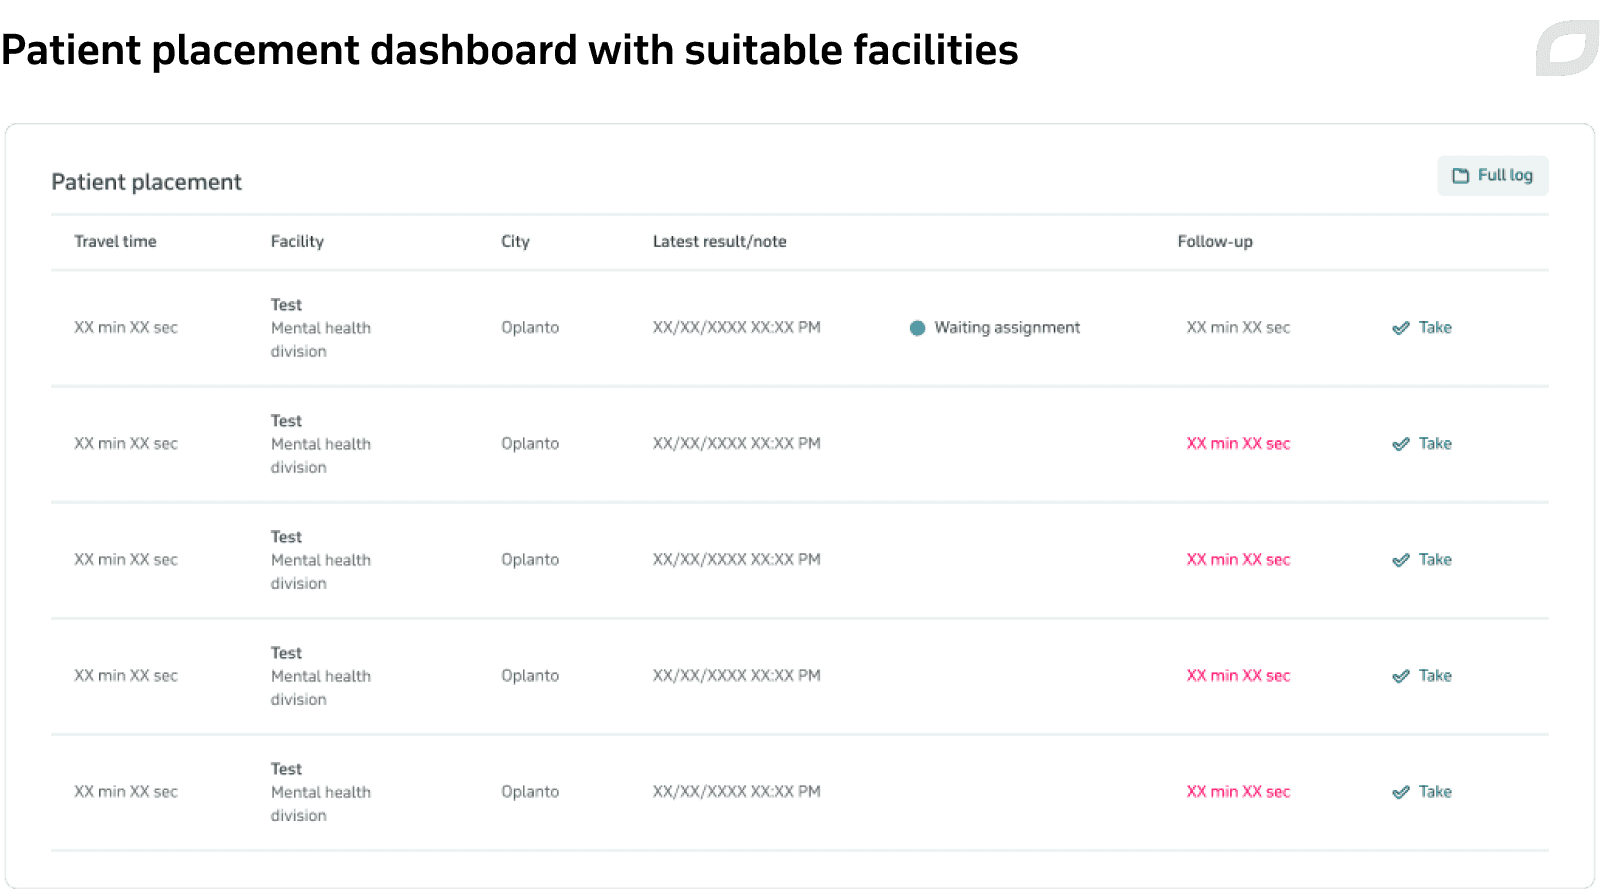 Patient placement dashboard with suitable facilities